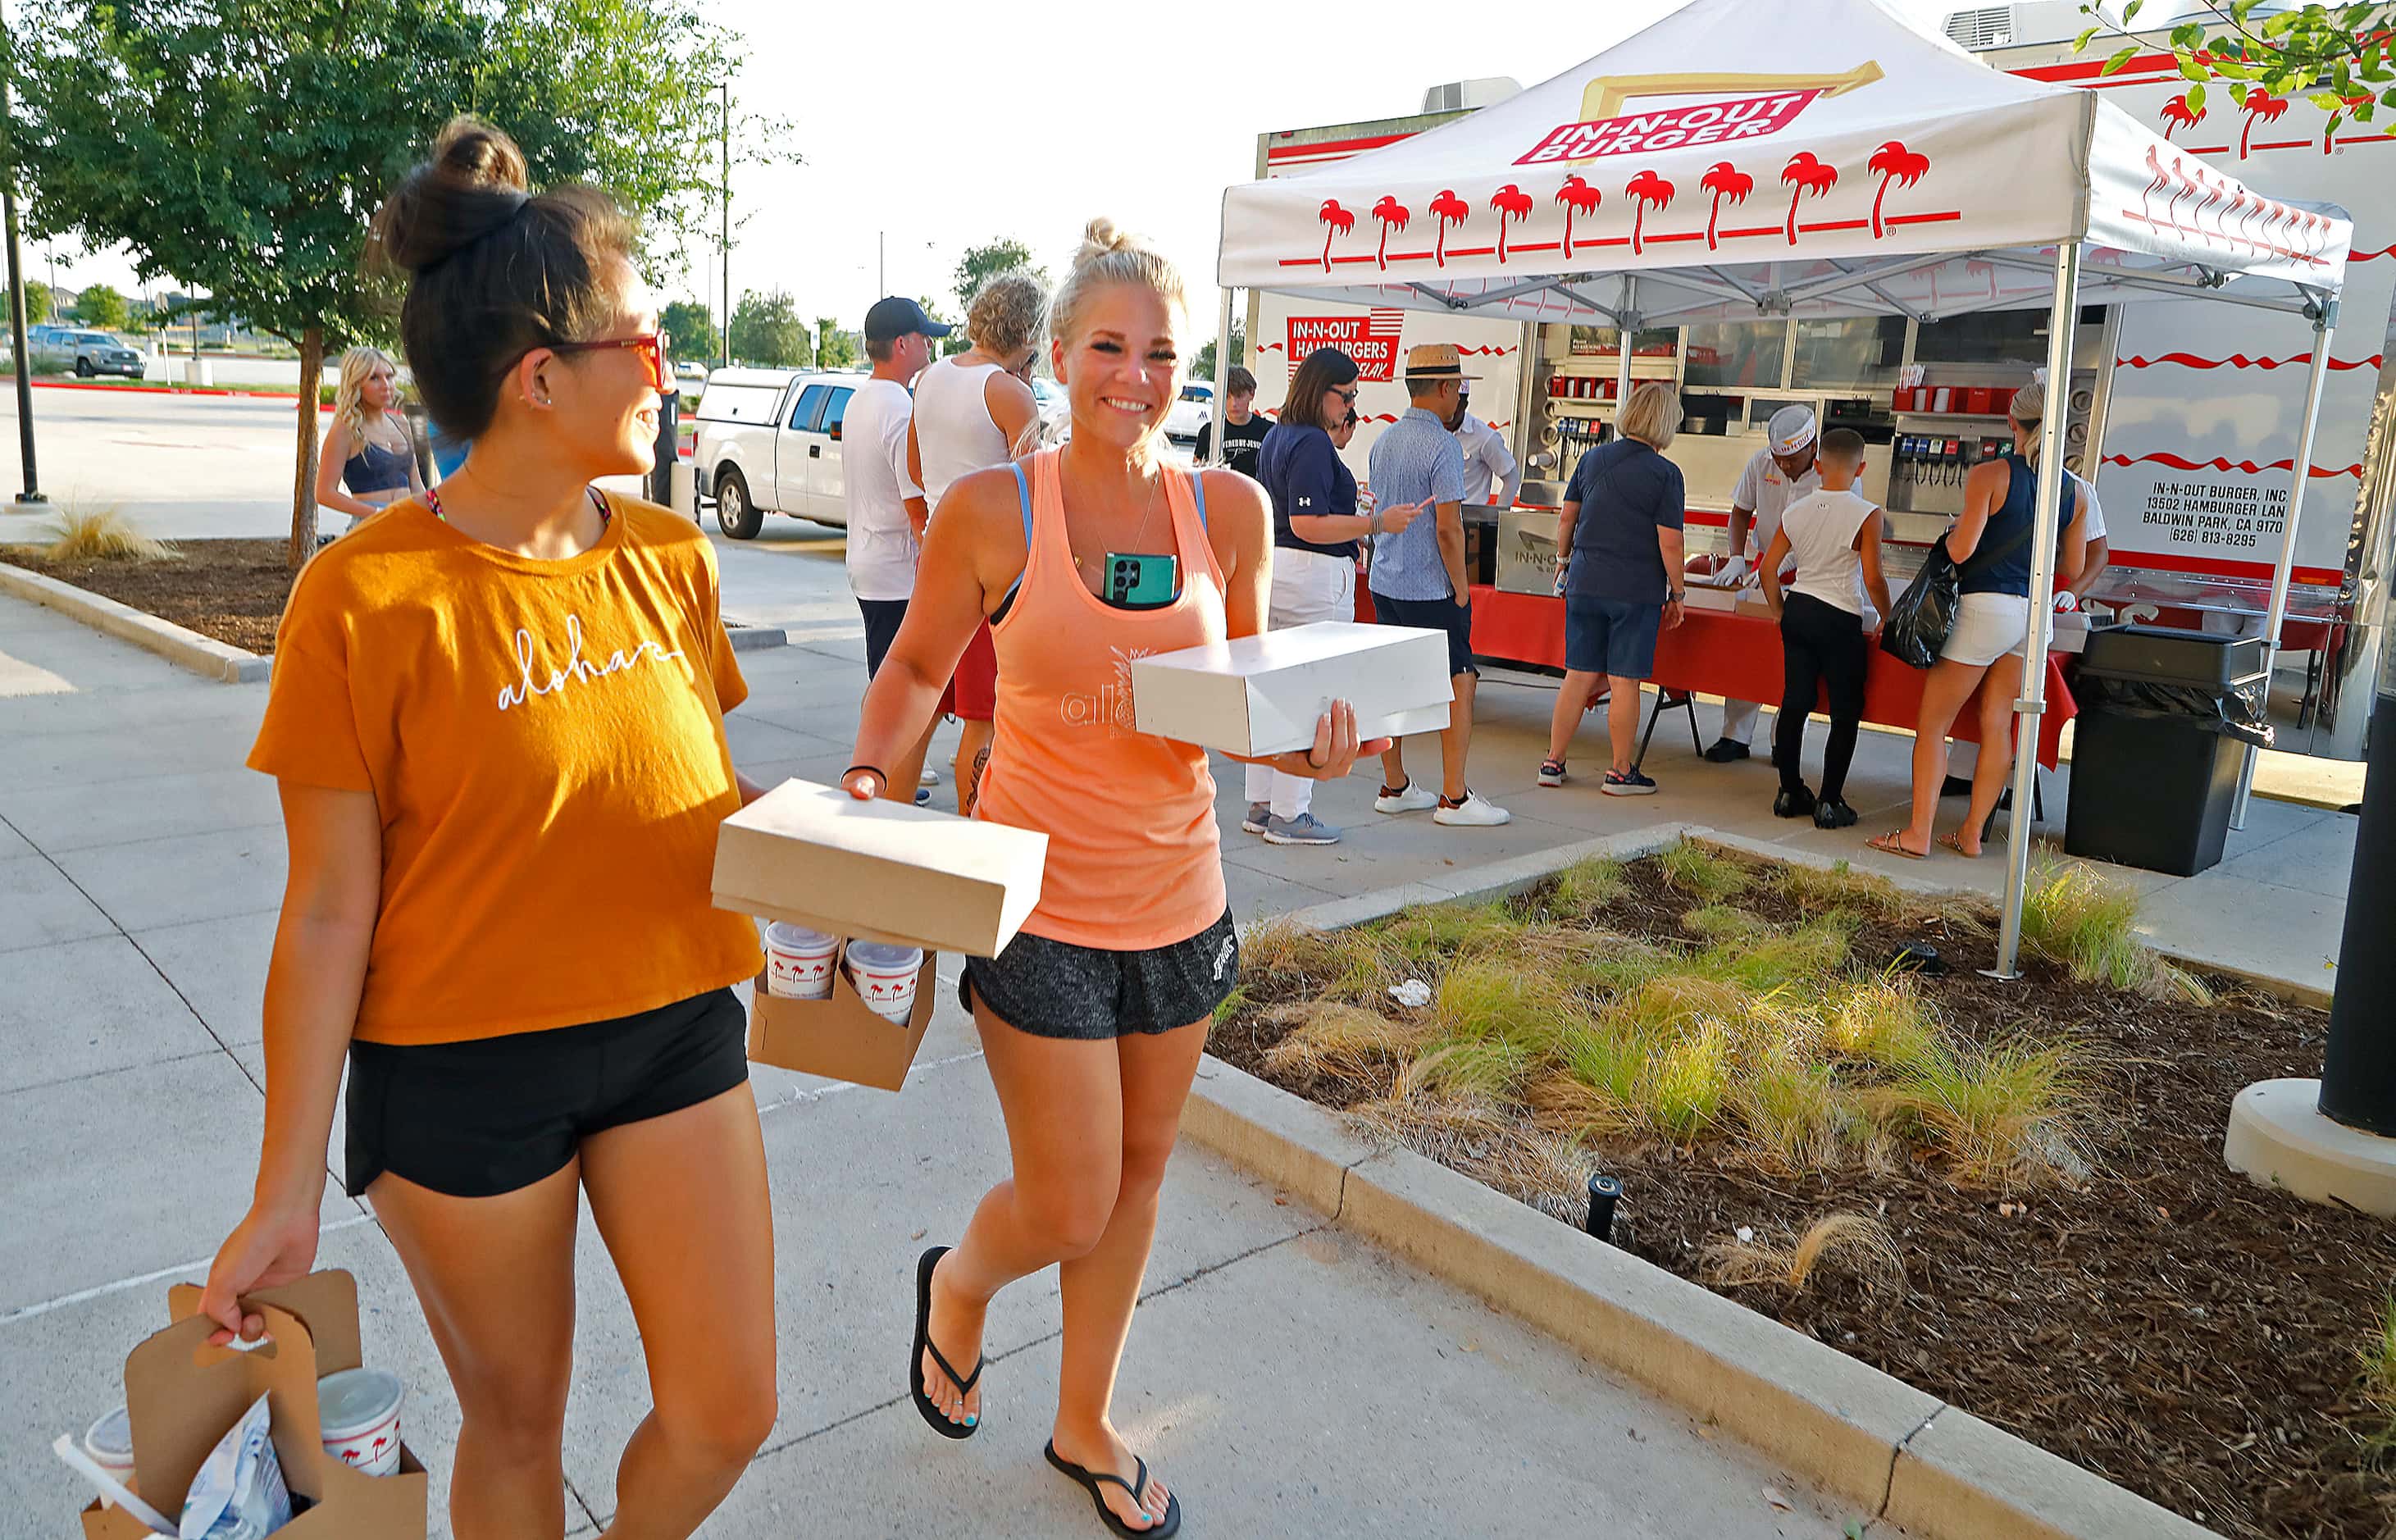 Ali Bailey (left) and Bristyn King pick up food from the In-N-Out food truck to eat while...